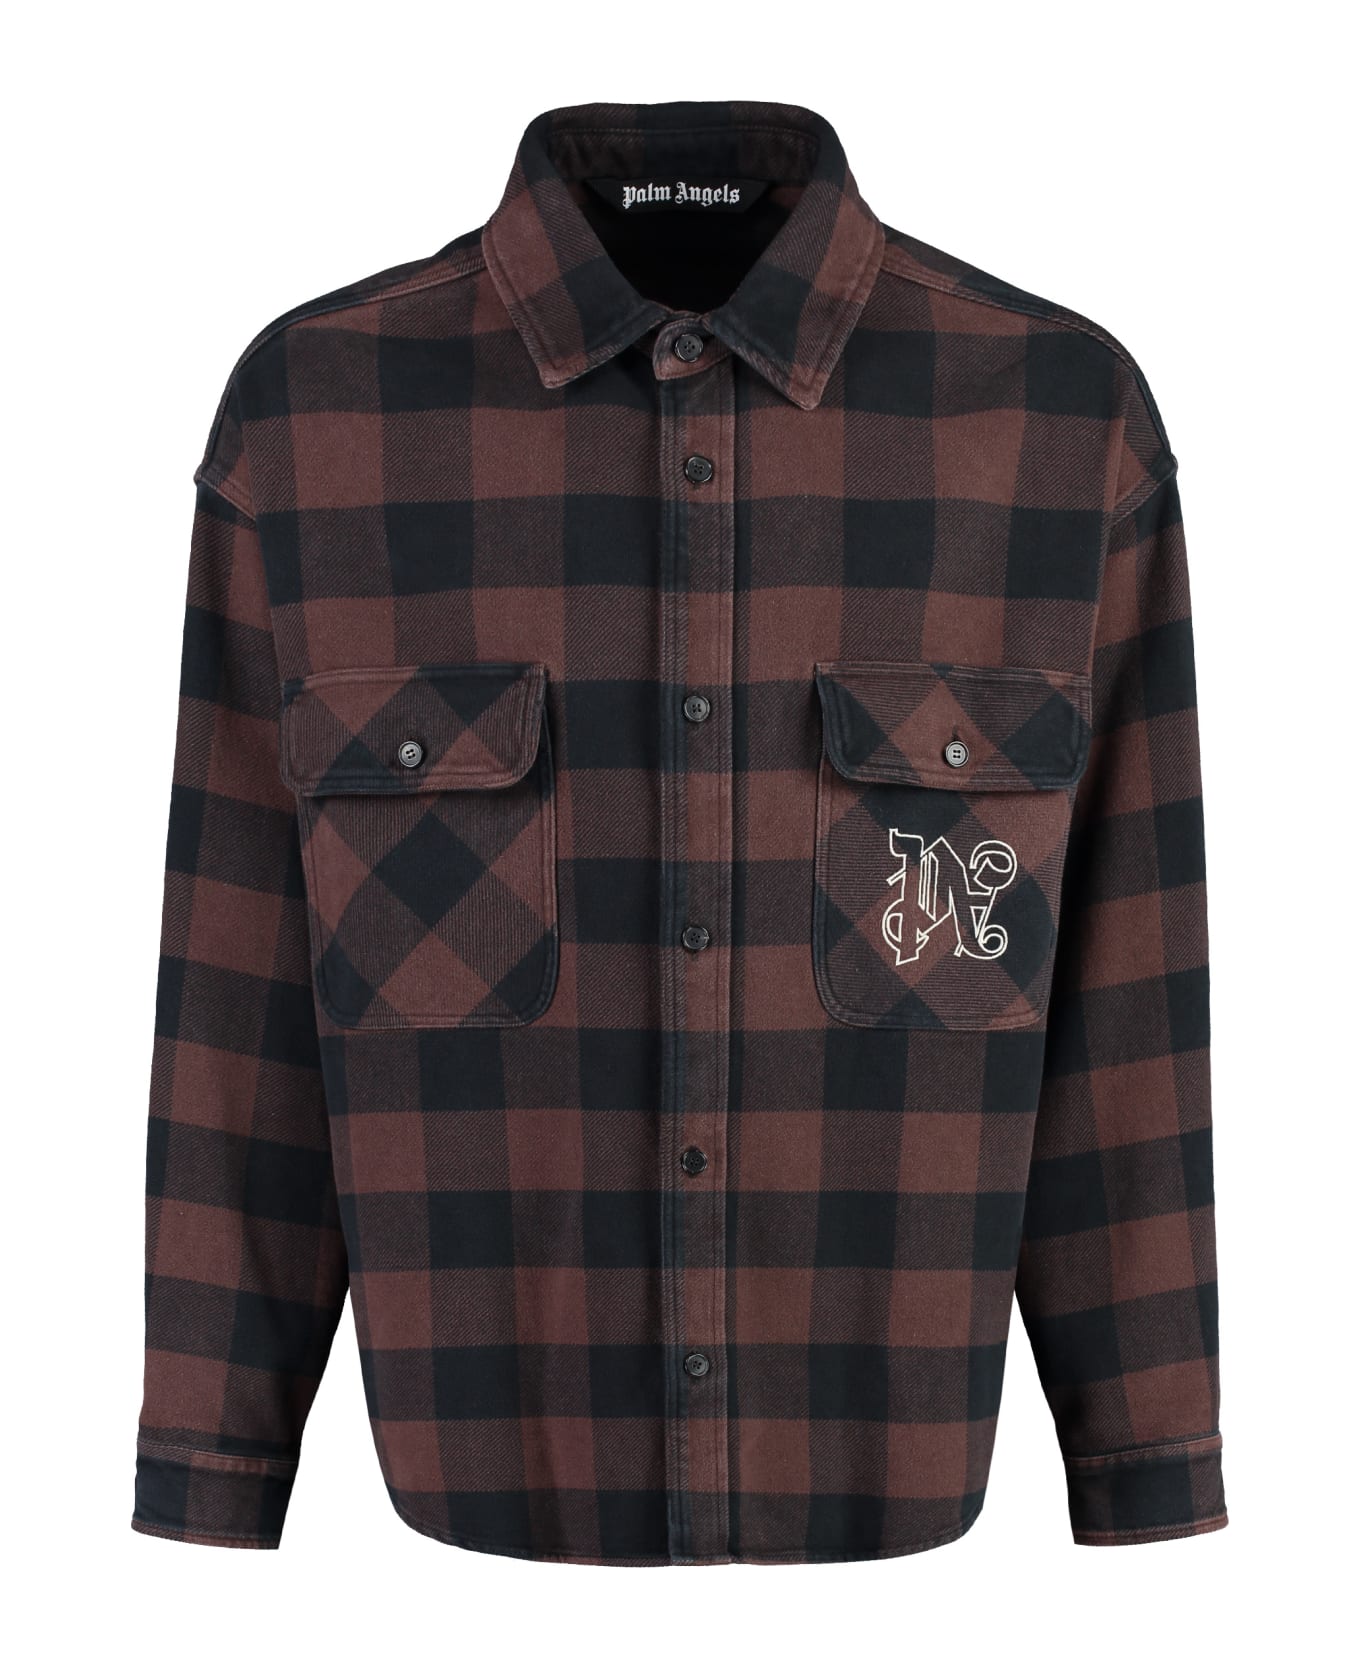 Palm Angels Cotton Overshirt - brown